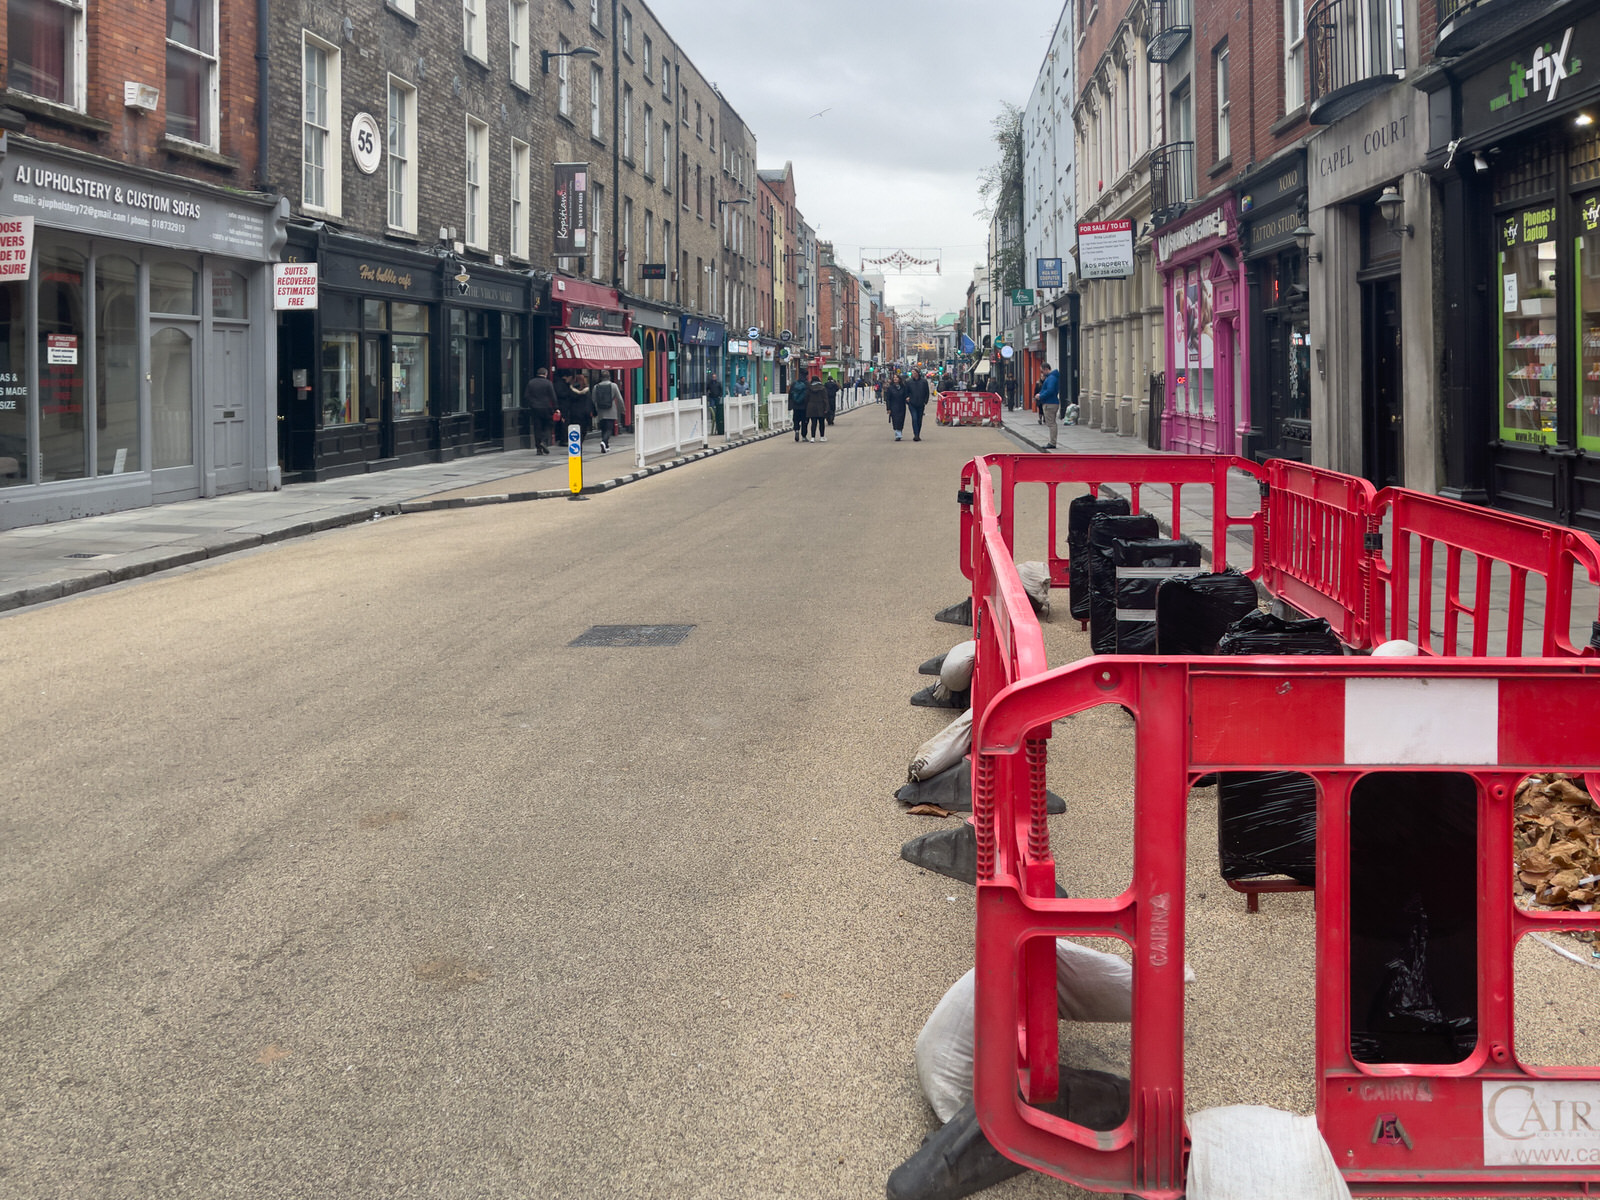 THE NEW STREET FURNITURE IS BEING INSTALLED ON CAPEL STREET [BUT THERE ARE FEW VISITORS TO BE SEEN TODAY] 003